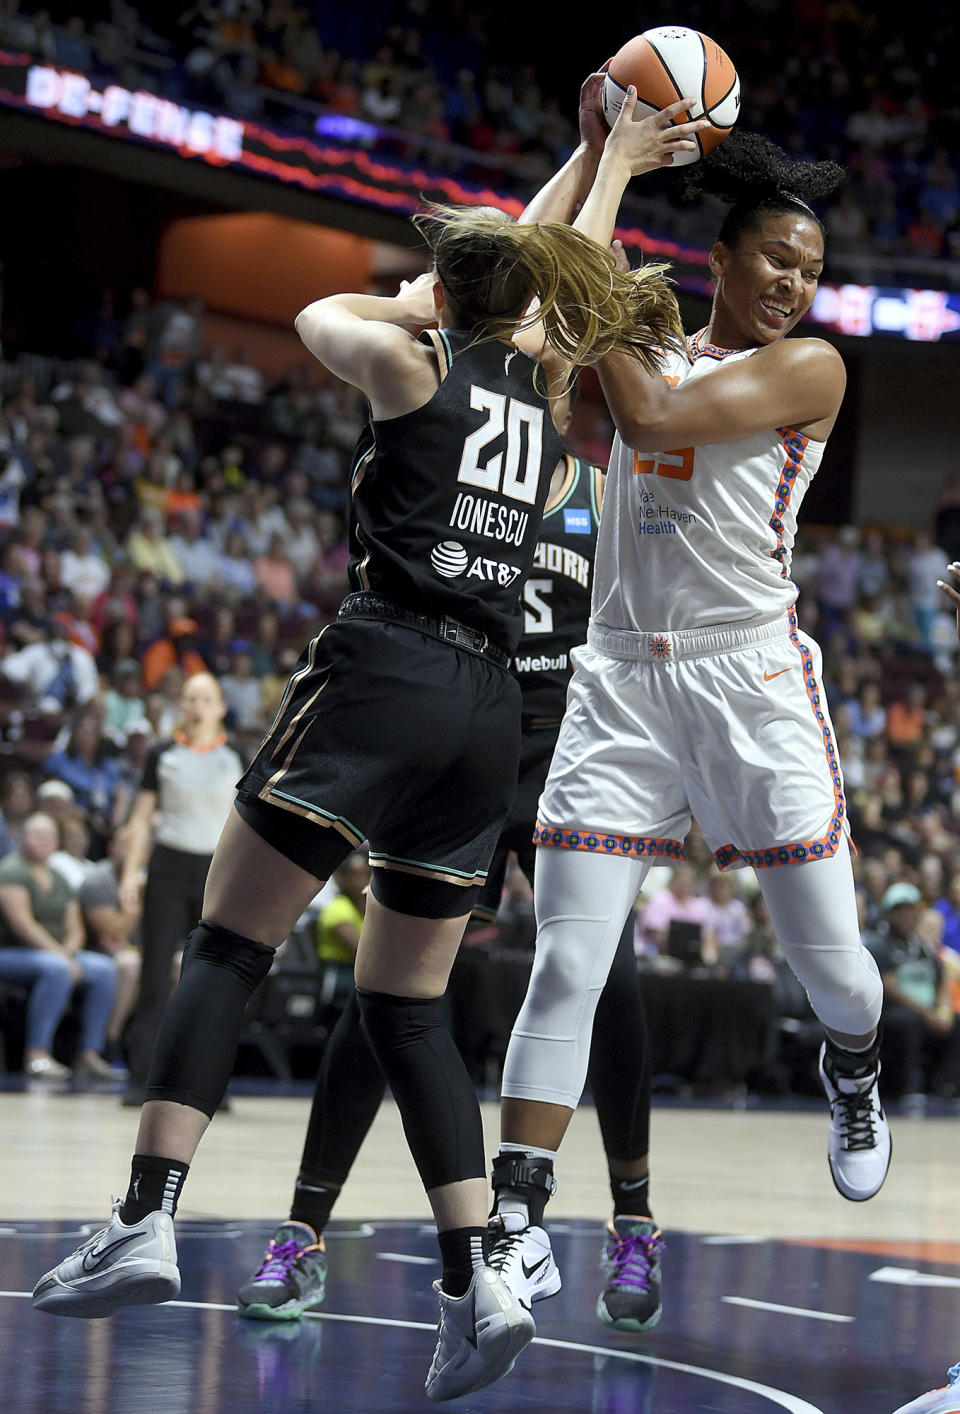 Connecticut Sun's Alyssa Thomas (25) steals a rebound from New York Liberty's Sabrina Ionescu (20) during the first half of a WNBA basketball game, Tuesday, June 27, 2023 at Mohegan Sun Arena in Uncasville, Conn. (Sarah Gordon/The Day via AP)